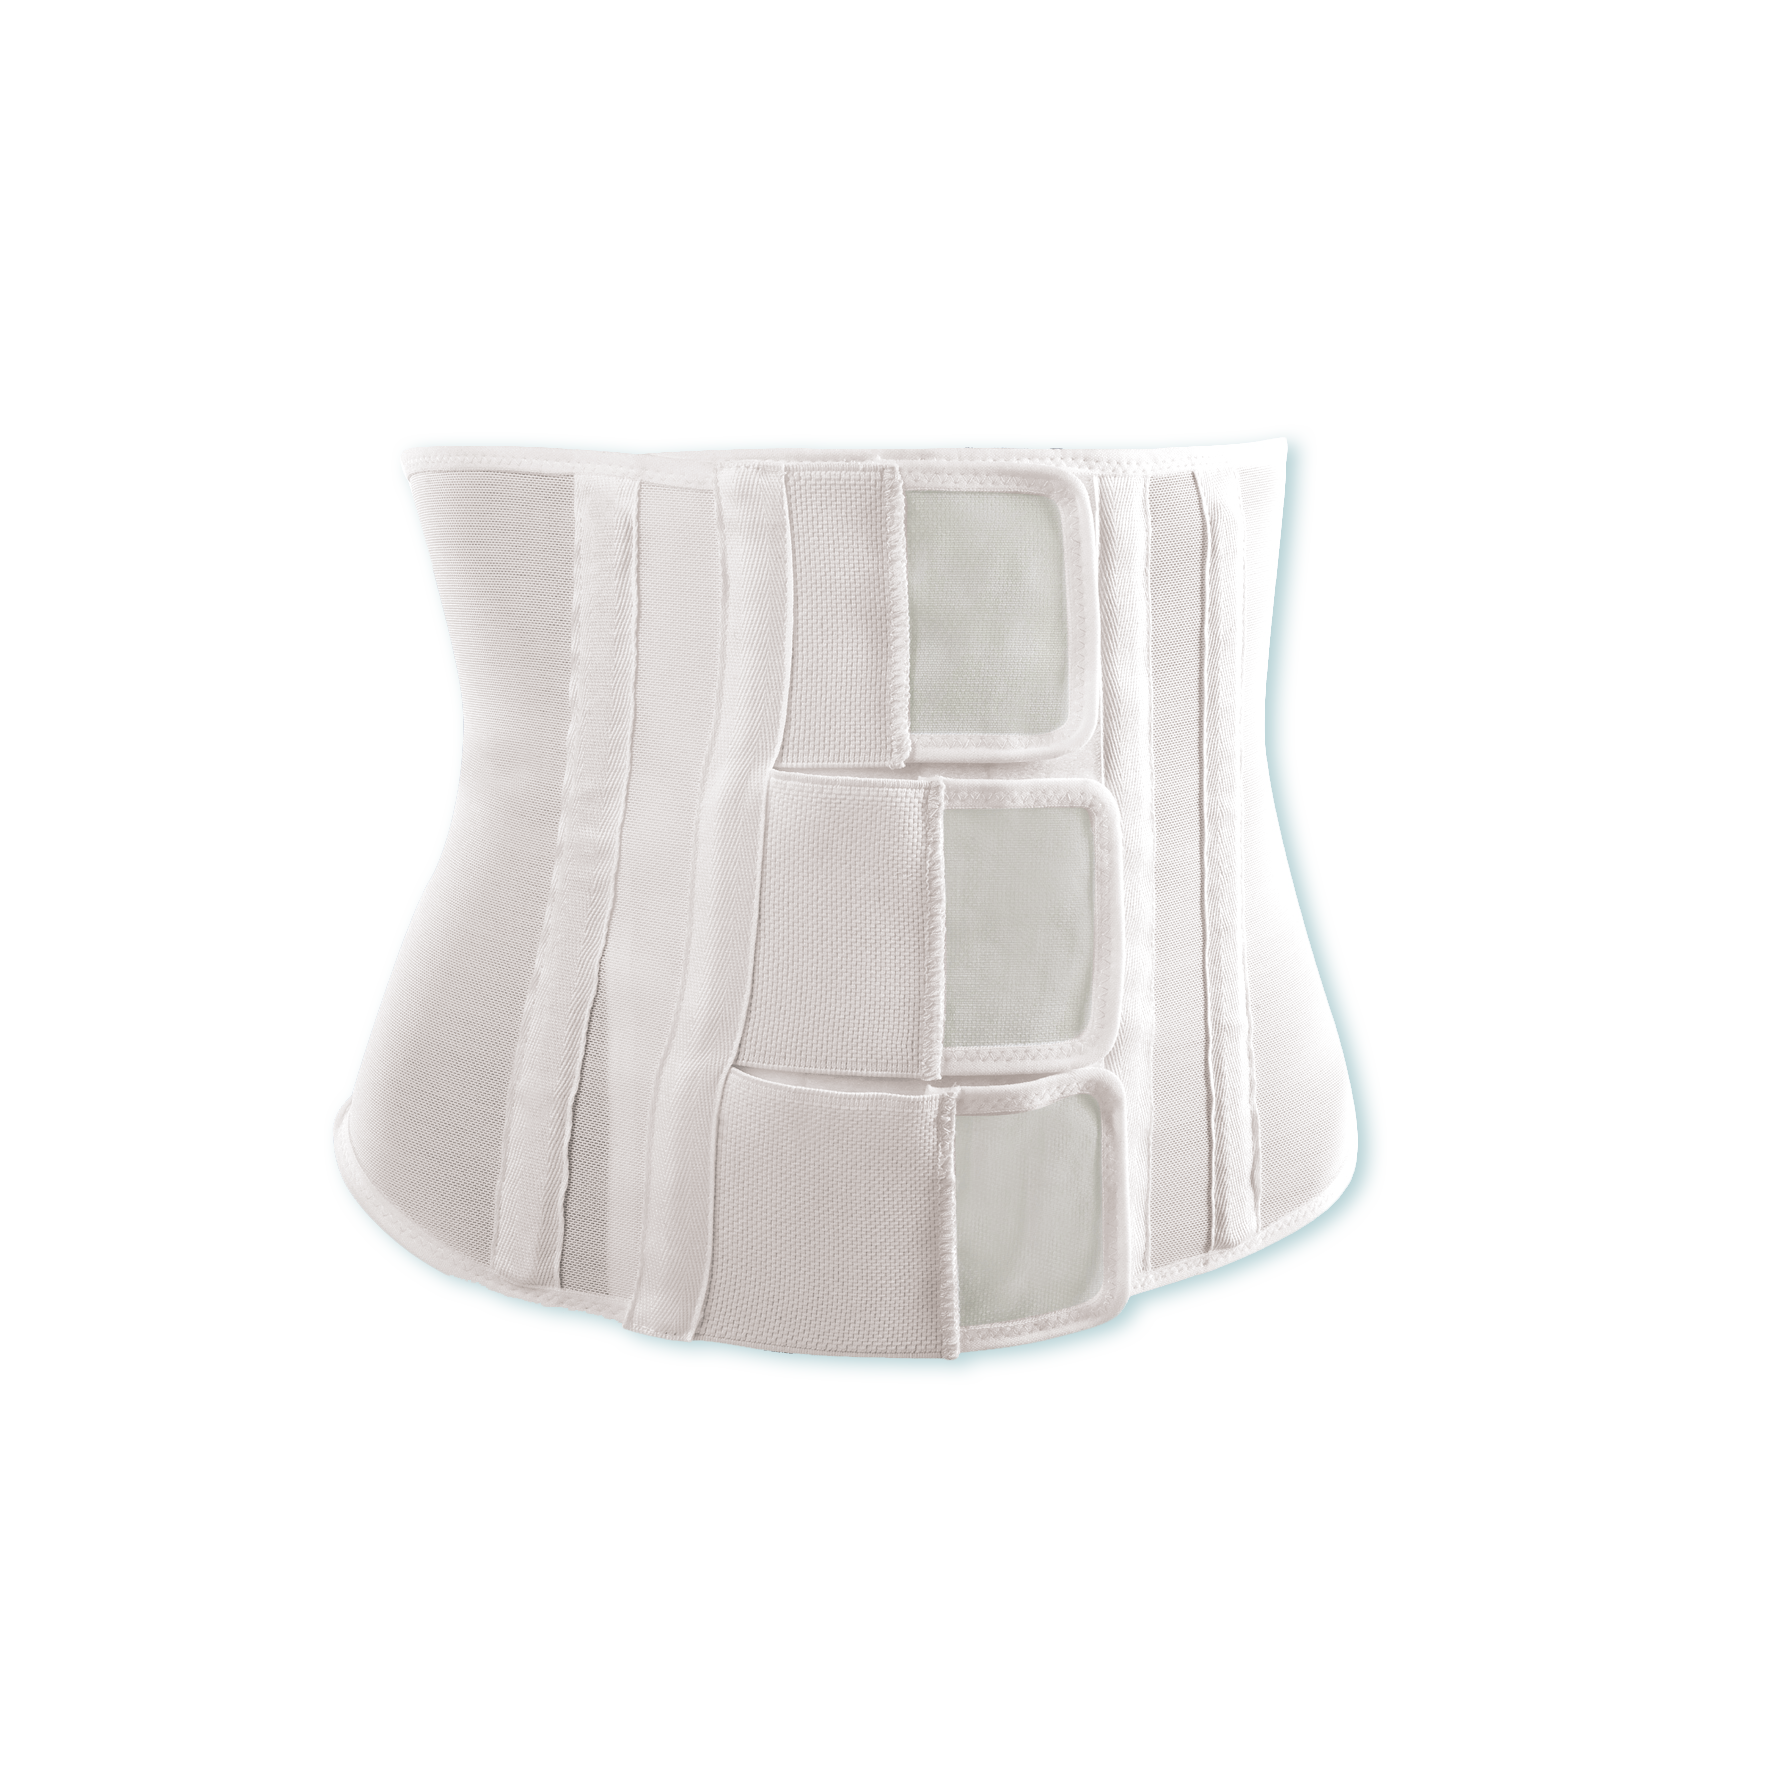 ZOYER Medical - Abdominal Binder and Maternity Back Support